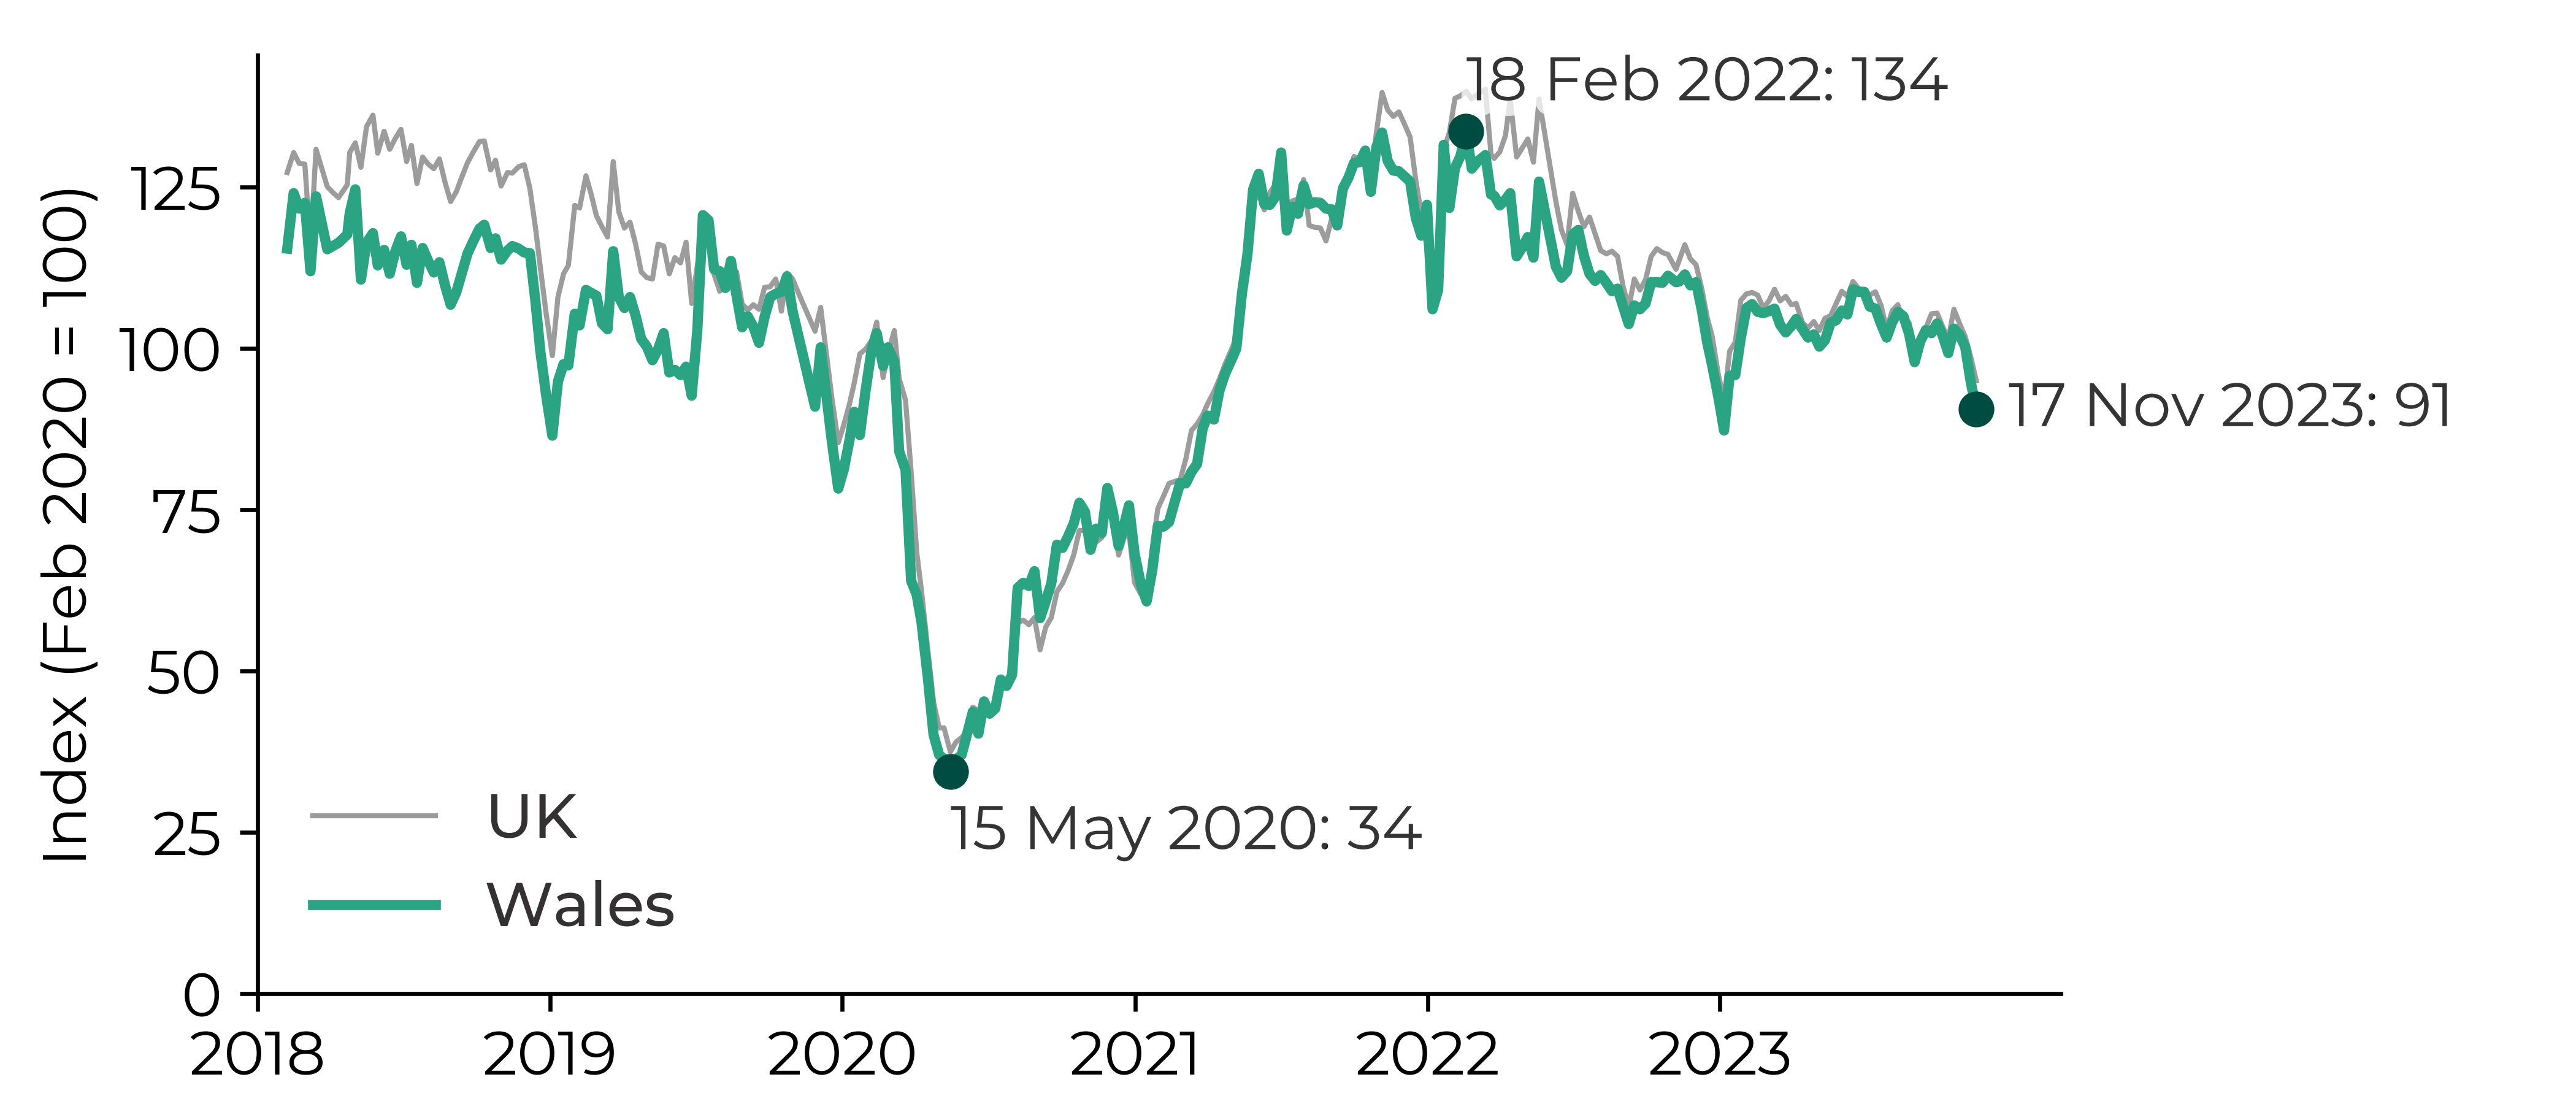 Graph showing that the index decreased from 100 in February 2020 to 34 in May 2020. The index increased to 134 by February 2022 and decreased to 91 by November 2023.